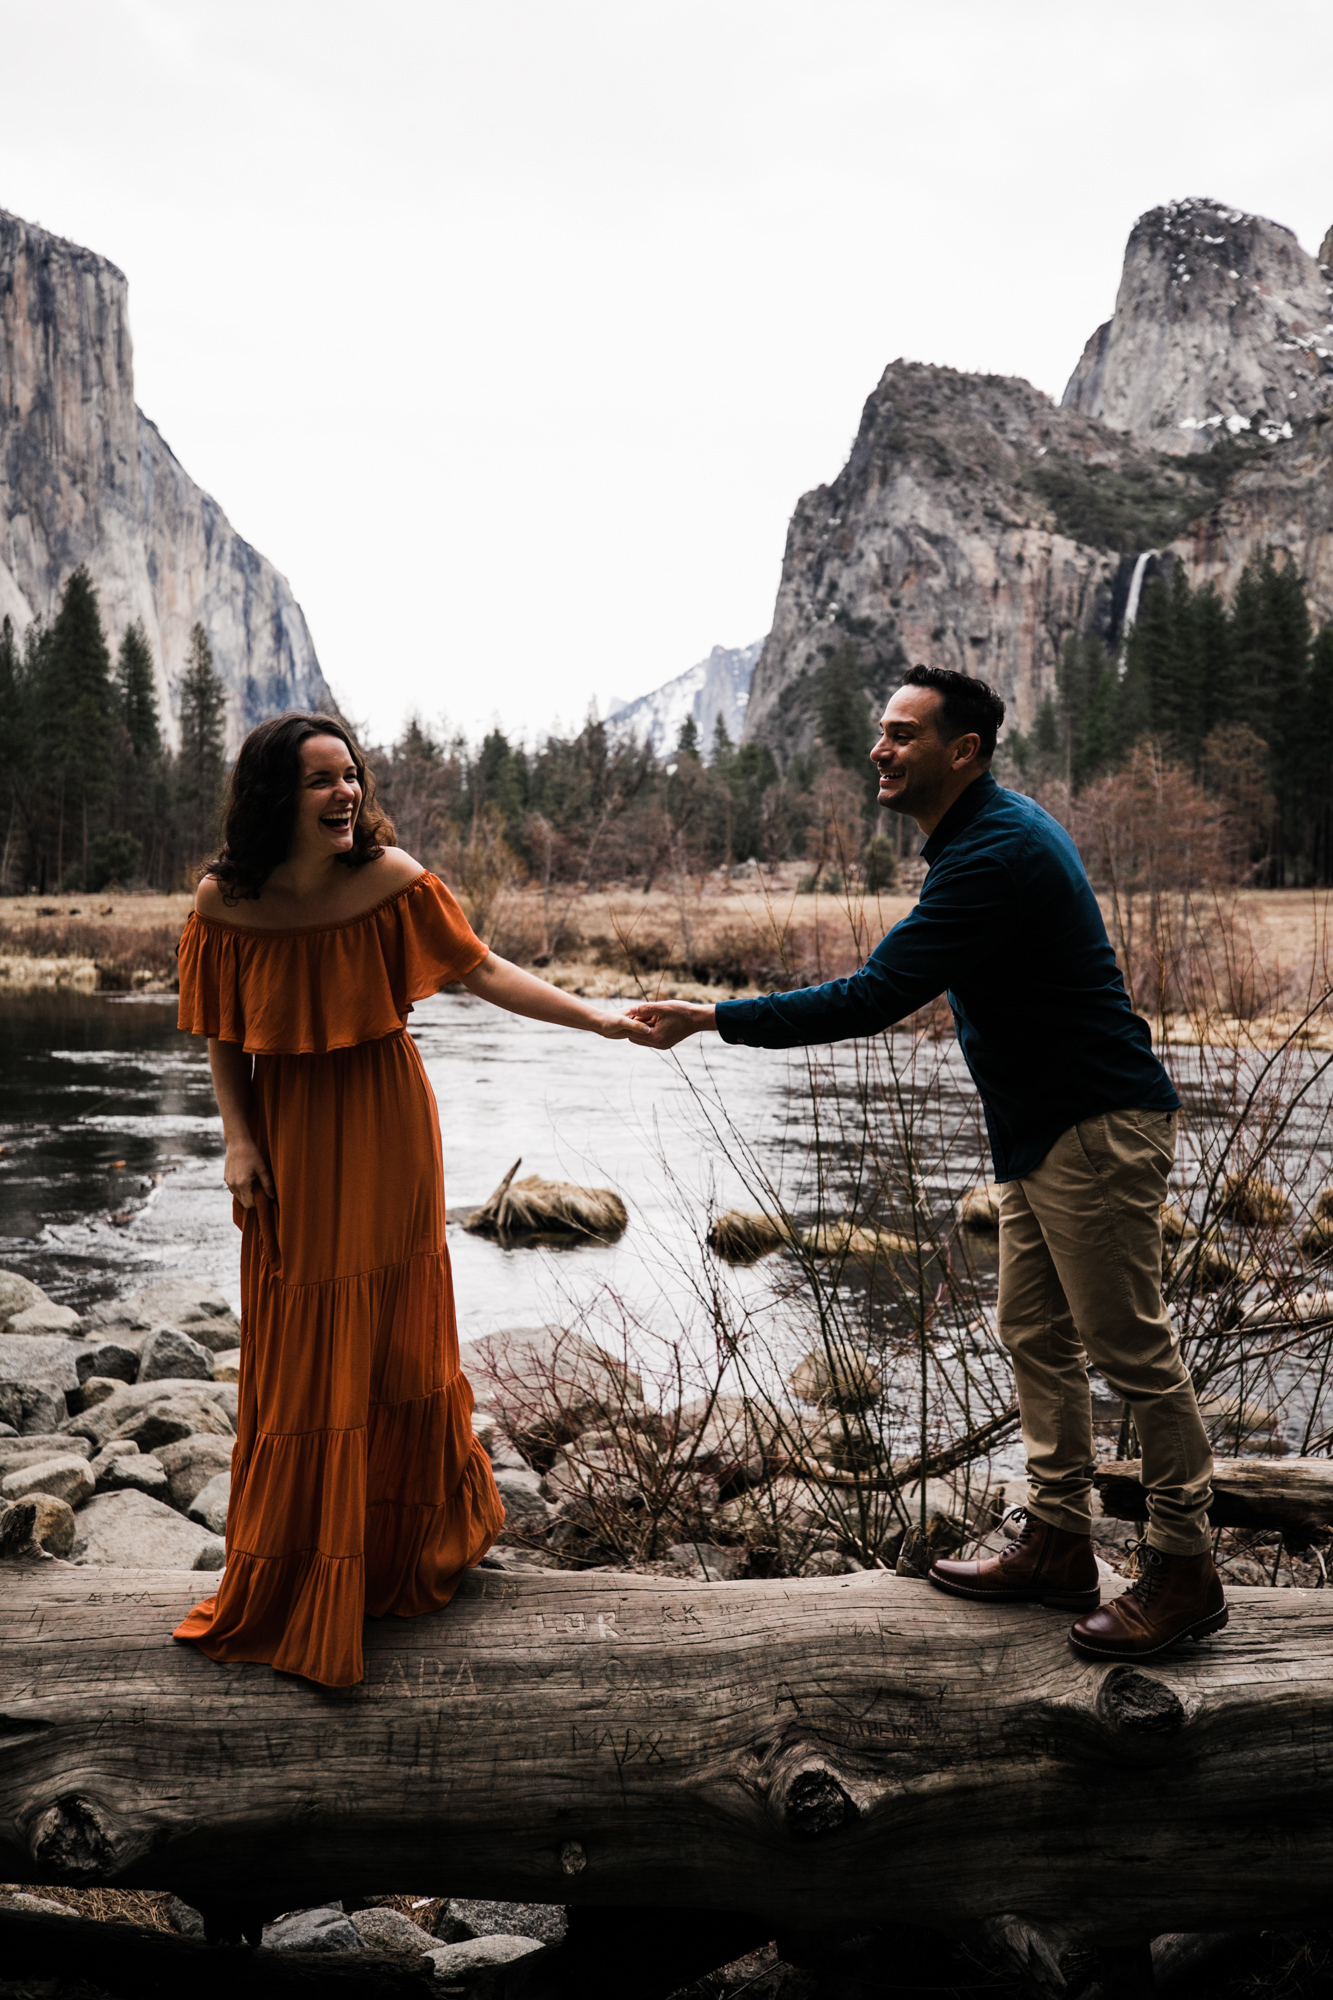 waterfalls + meadows engagement session in yosemite national park | adventurous elopement photographer | the hearnes adventure photography | www.thehearnes.com